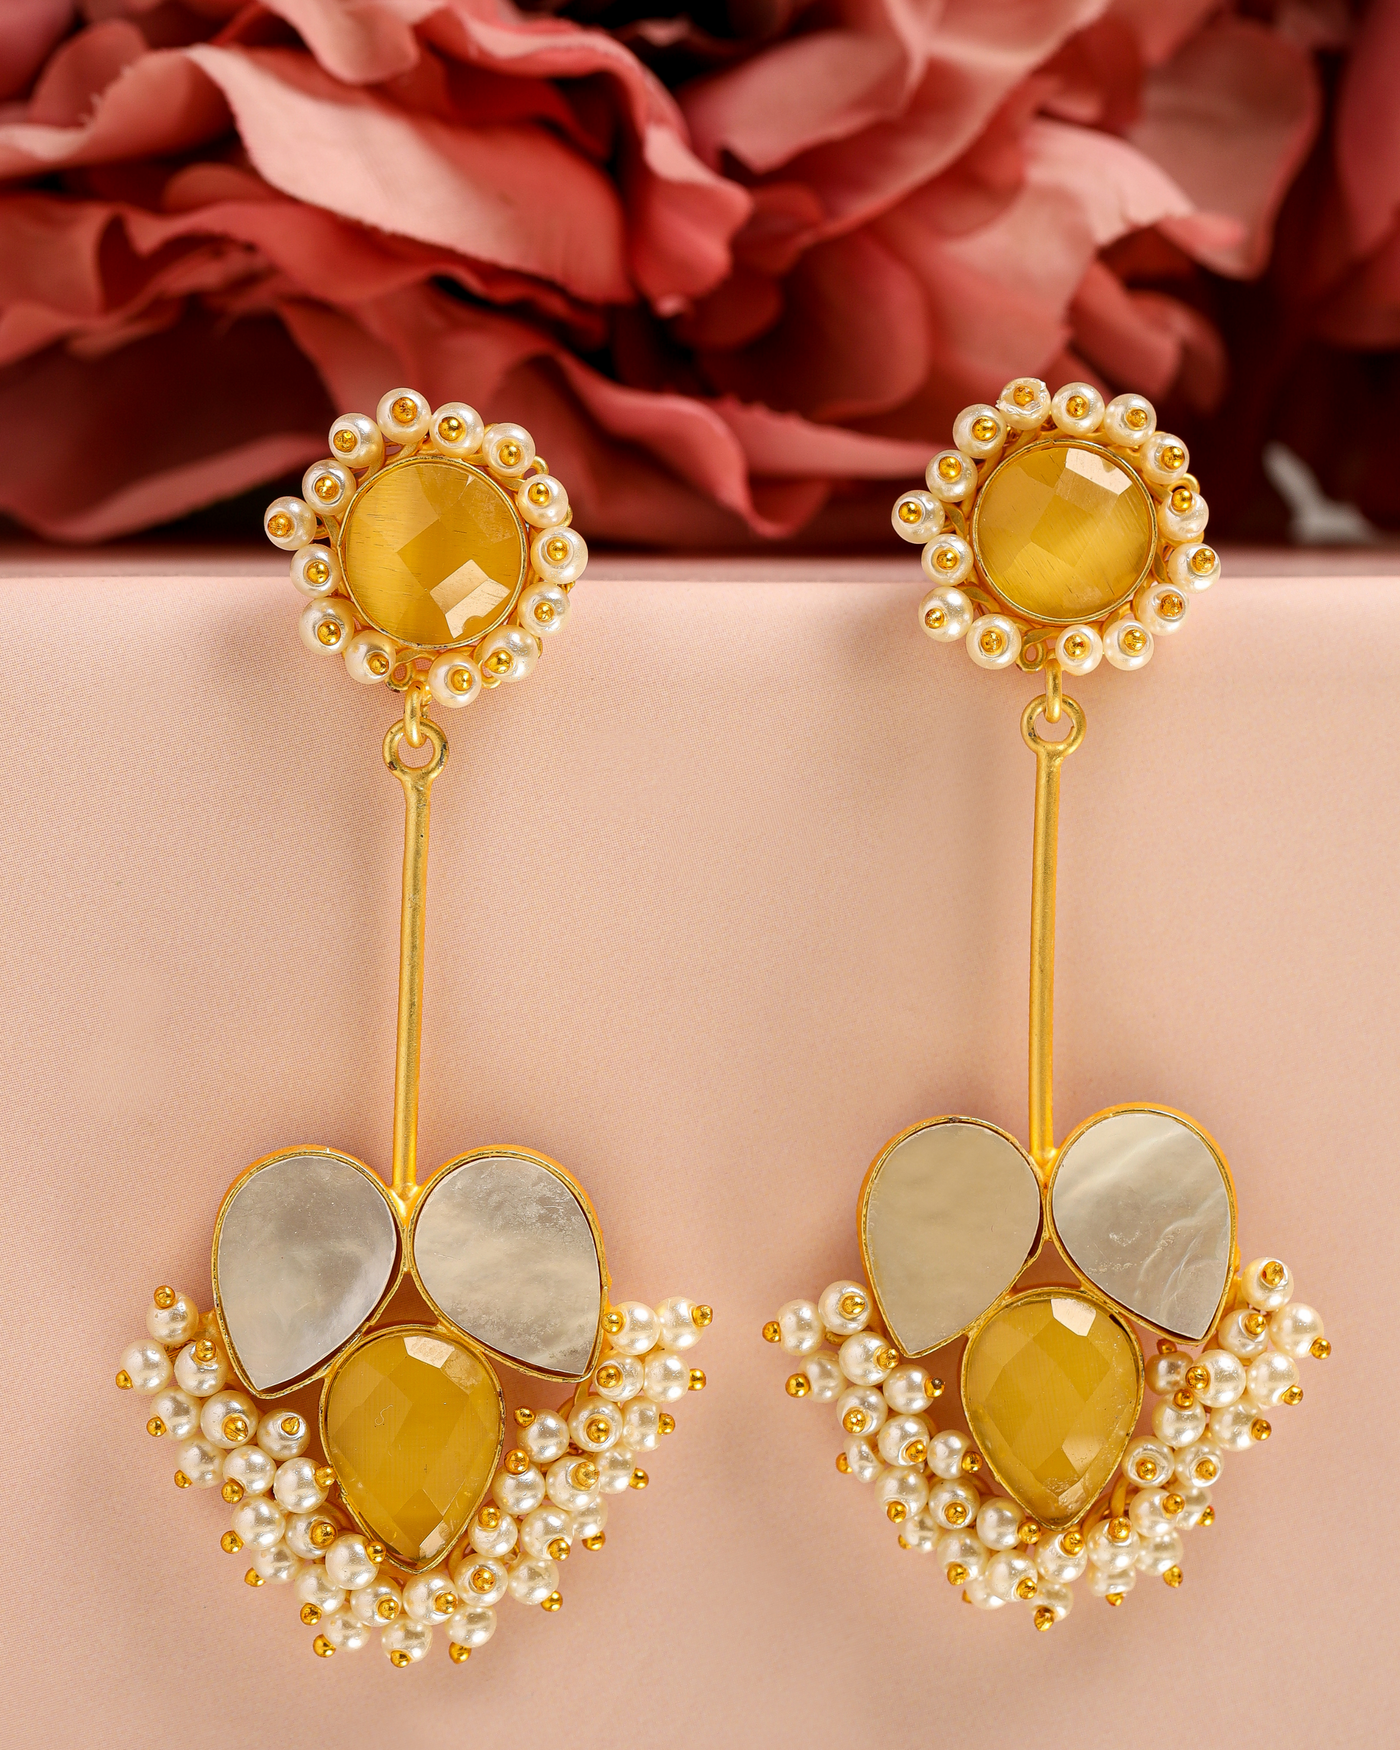 Buy Mineral Yellow Handcrafted Earrings online in India at Best Price   Aachho